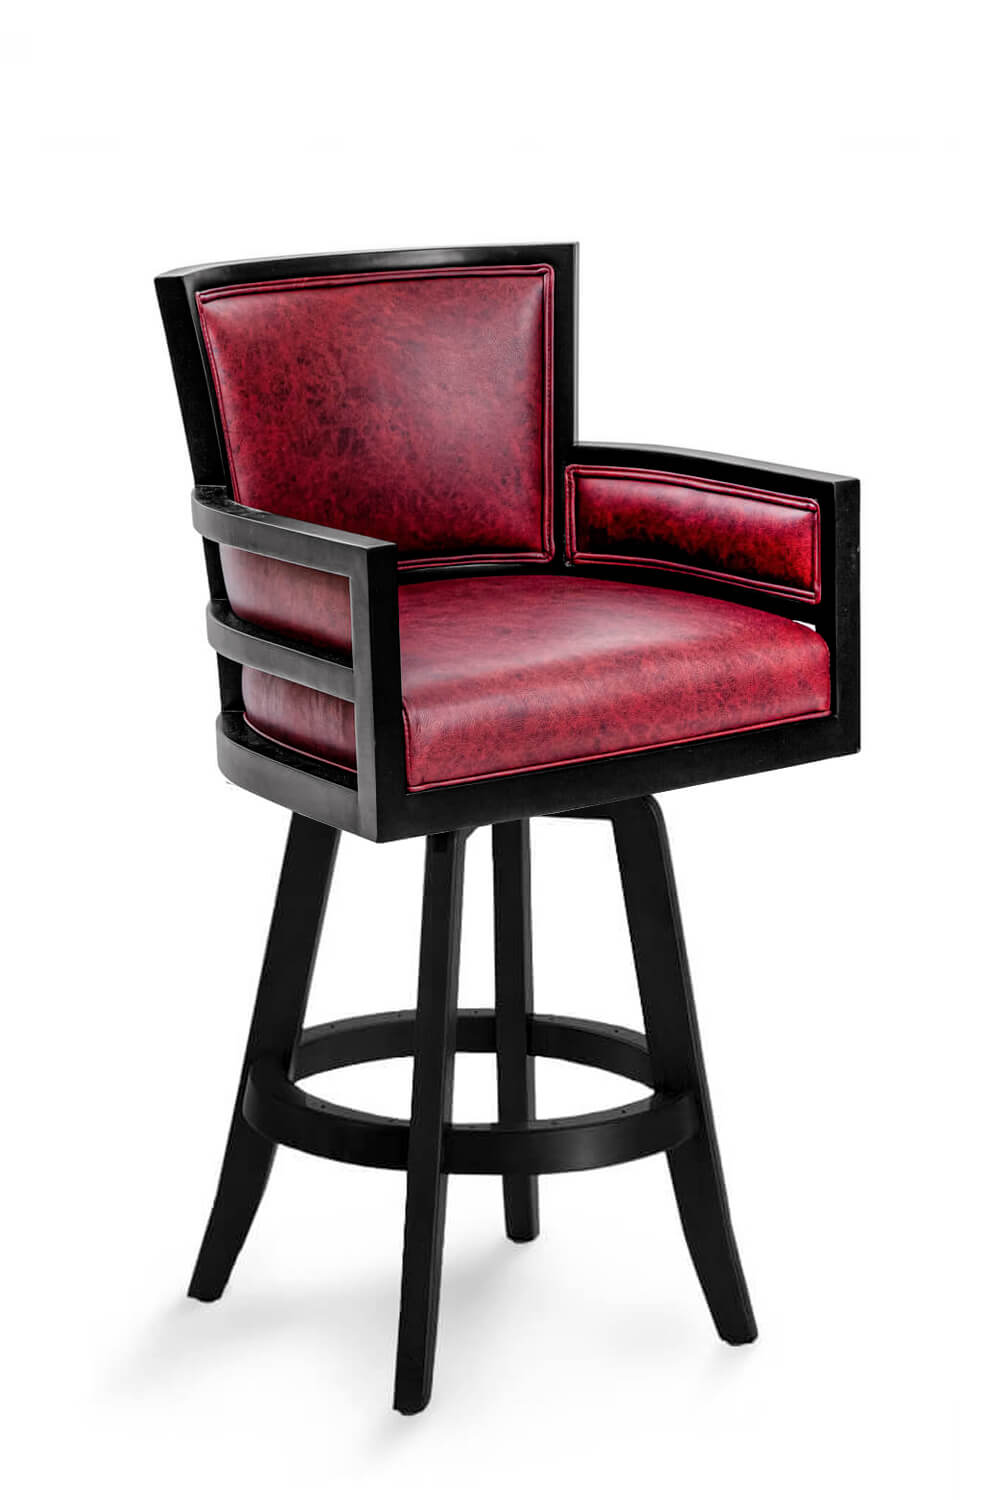 Metra Upholstered Wood Swivel Stool, Bar Stools Red Leather